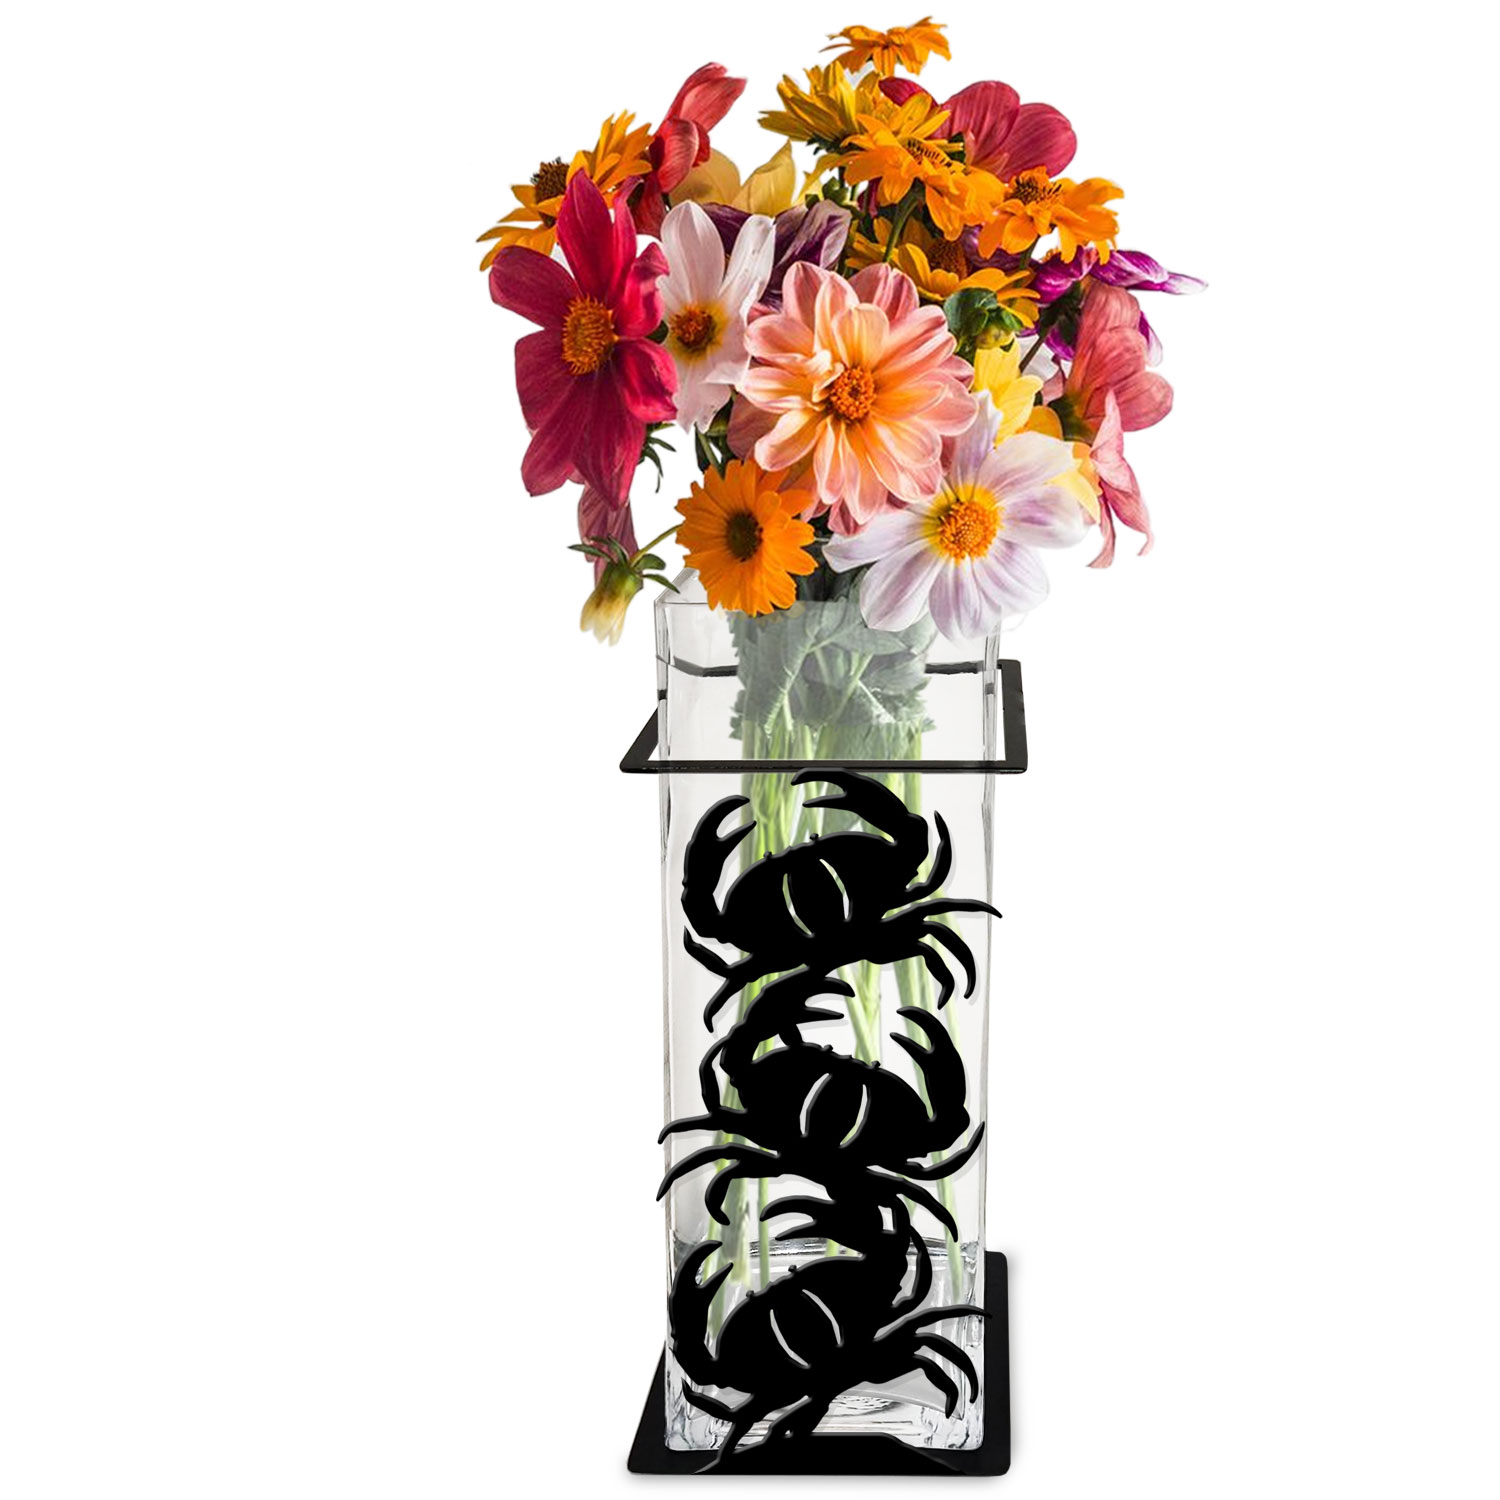 621508 - Crabs 12in Tall Metal and Glass Square Vase